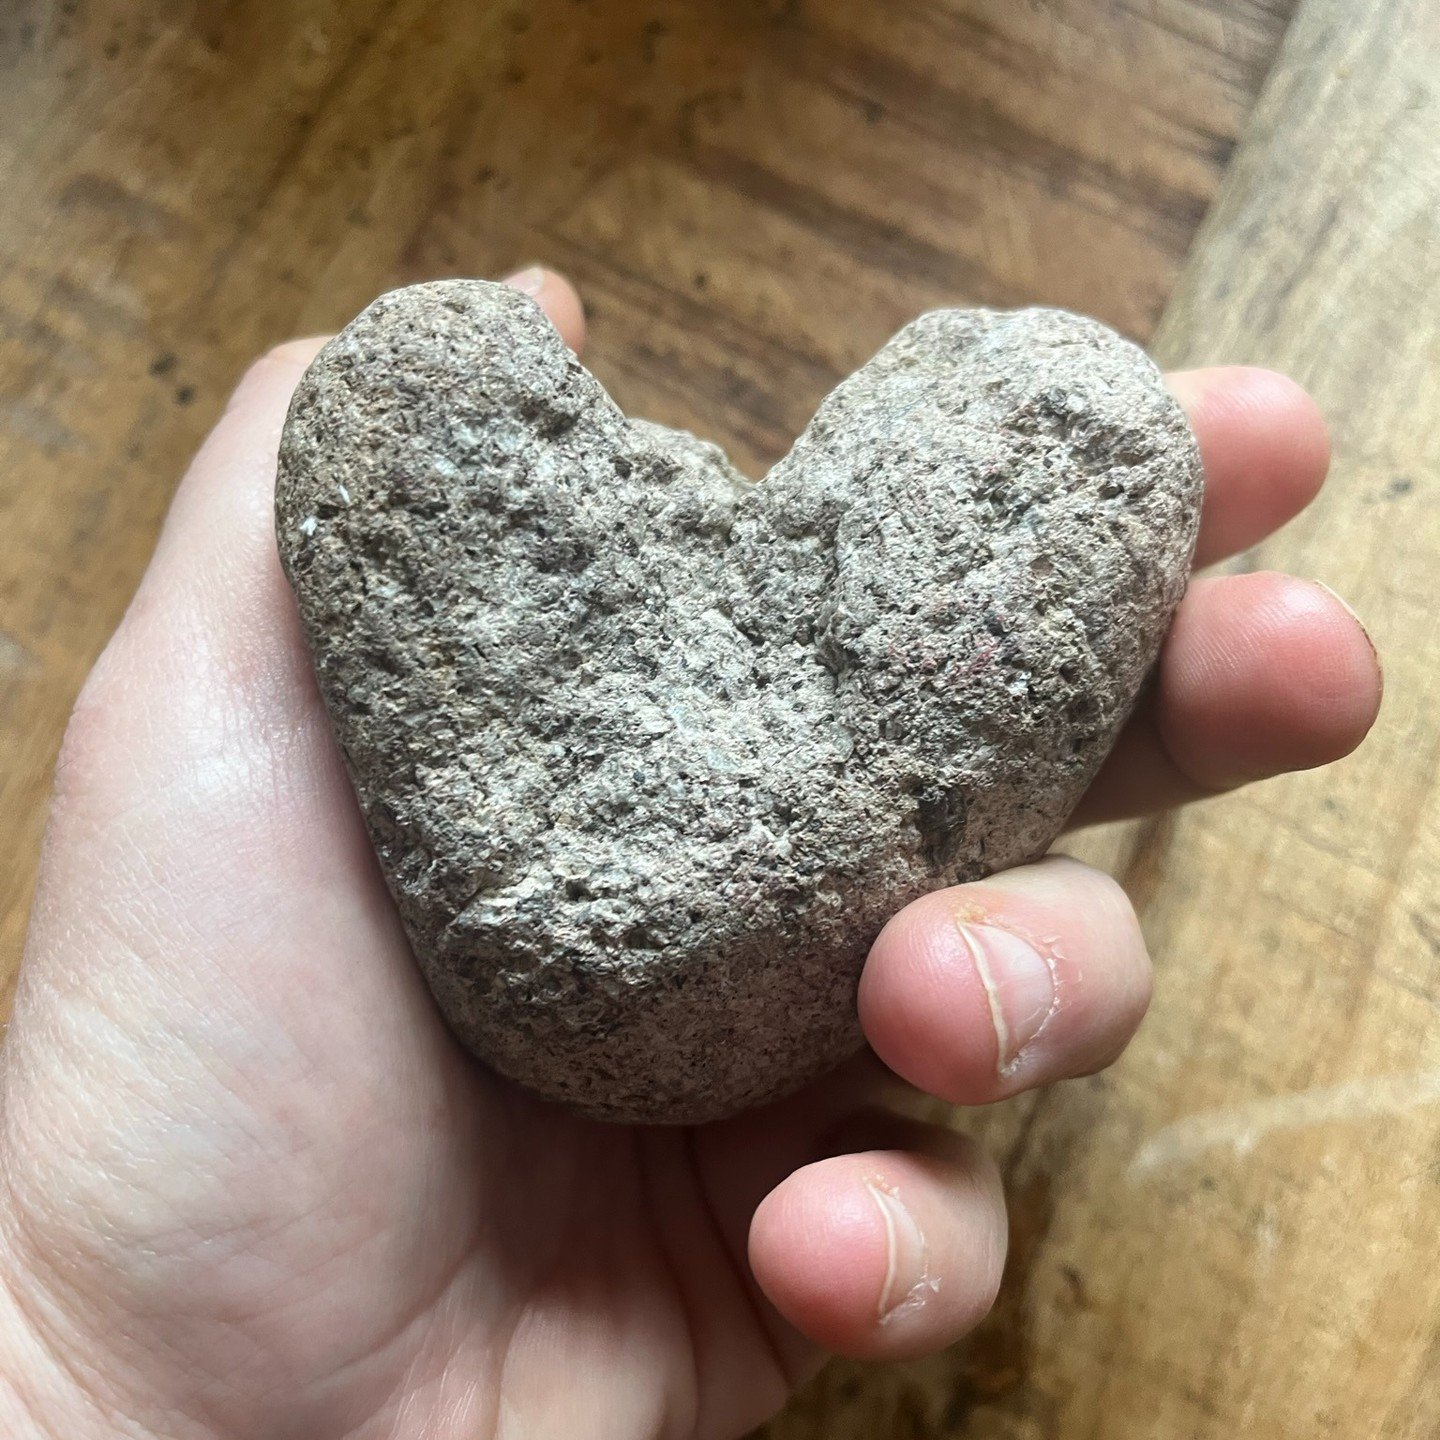 Here is a heart rock that my son, Jack found many years ago and it's one of my favorite healing stones. I found it strewn around my new to me car after it was totaled in an accident on the way to hosting a healing circle this past Saturday. It was wi